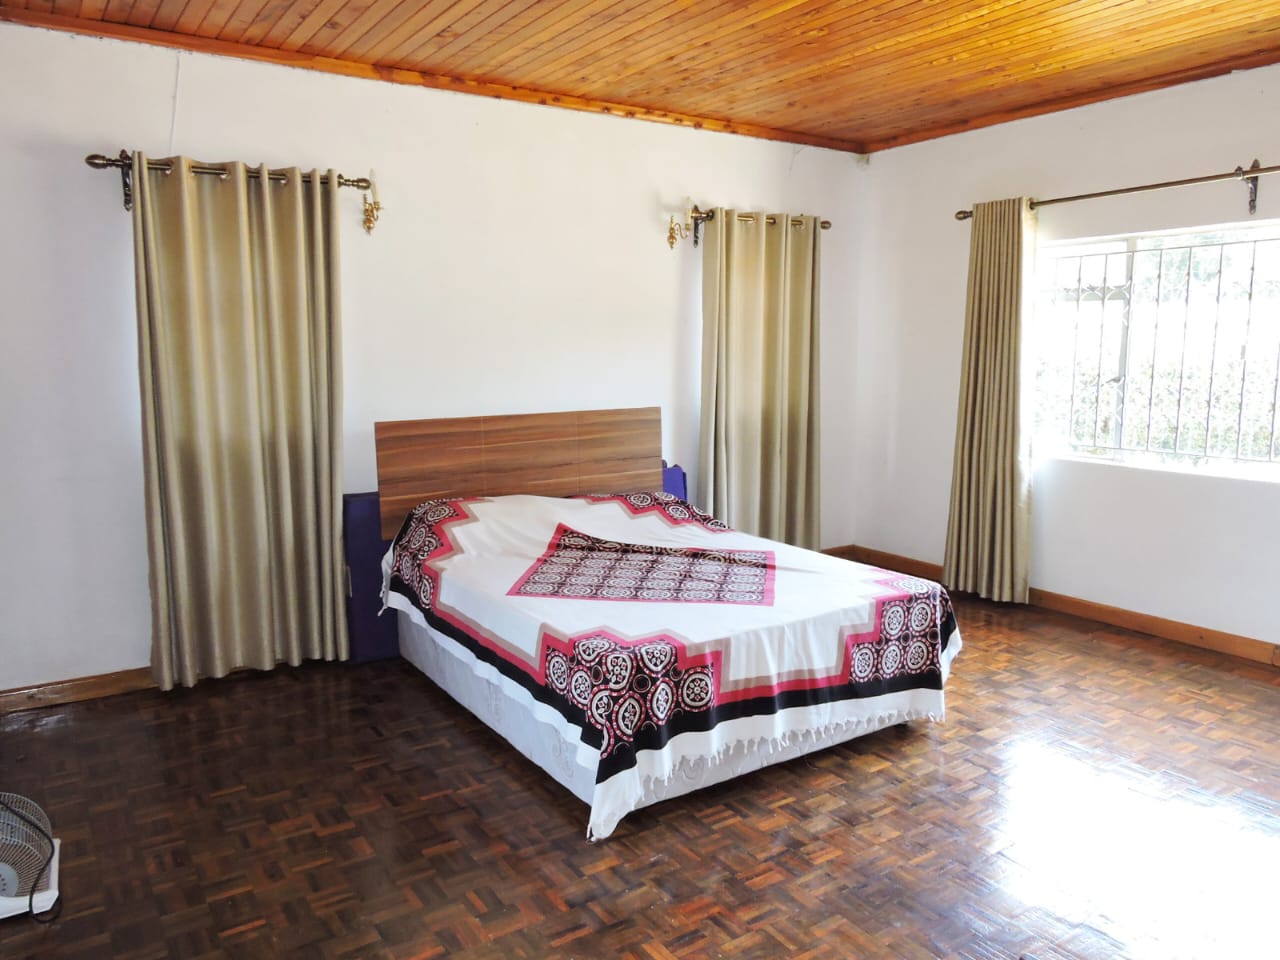 4 Bedroom stand alone house for sale in Loresho ridge on 0.568 Acres. Price - Ksh. 85M. Musilli Homes